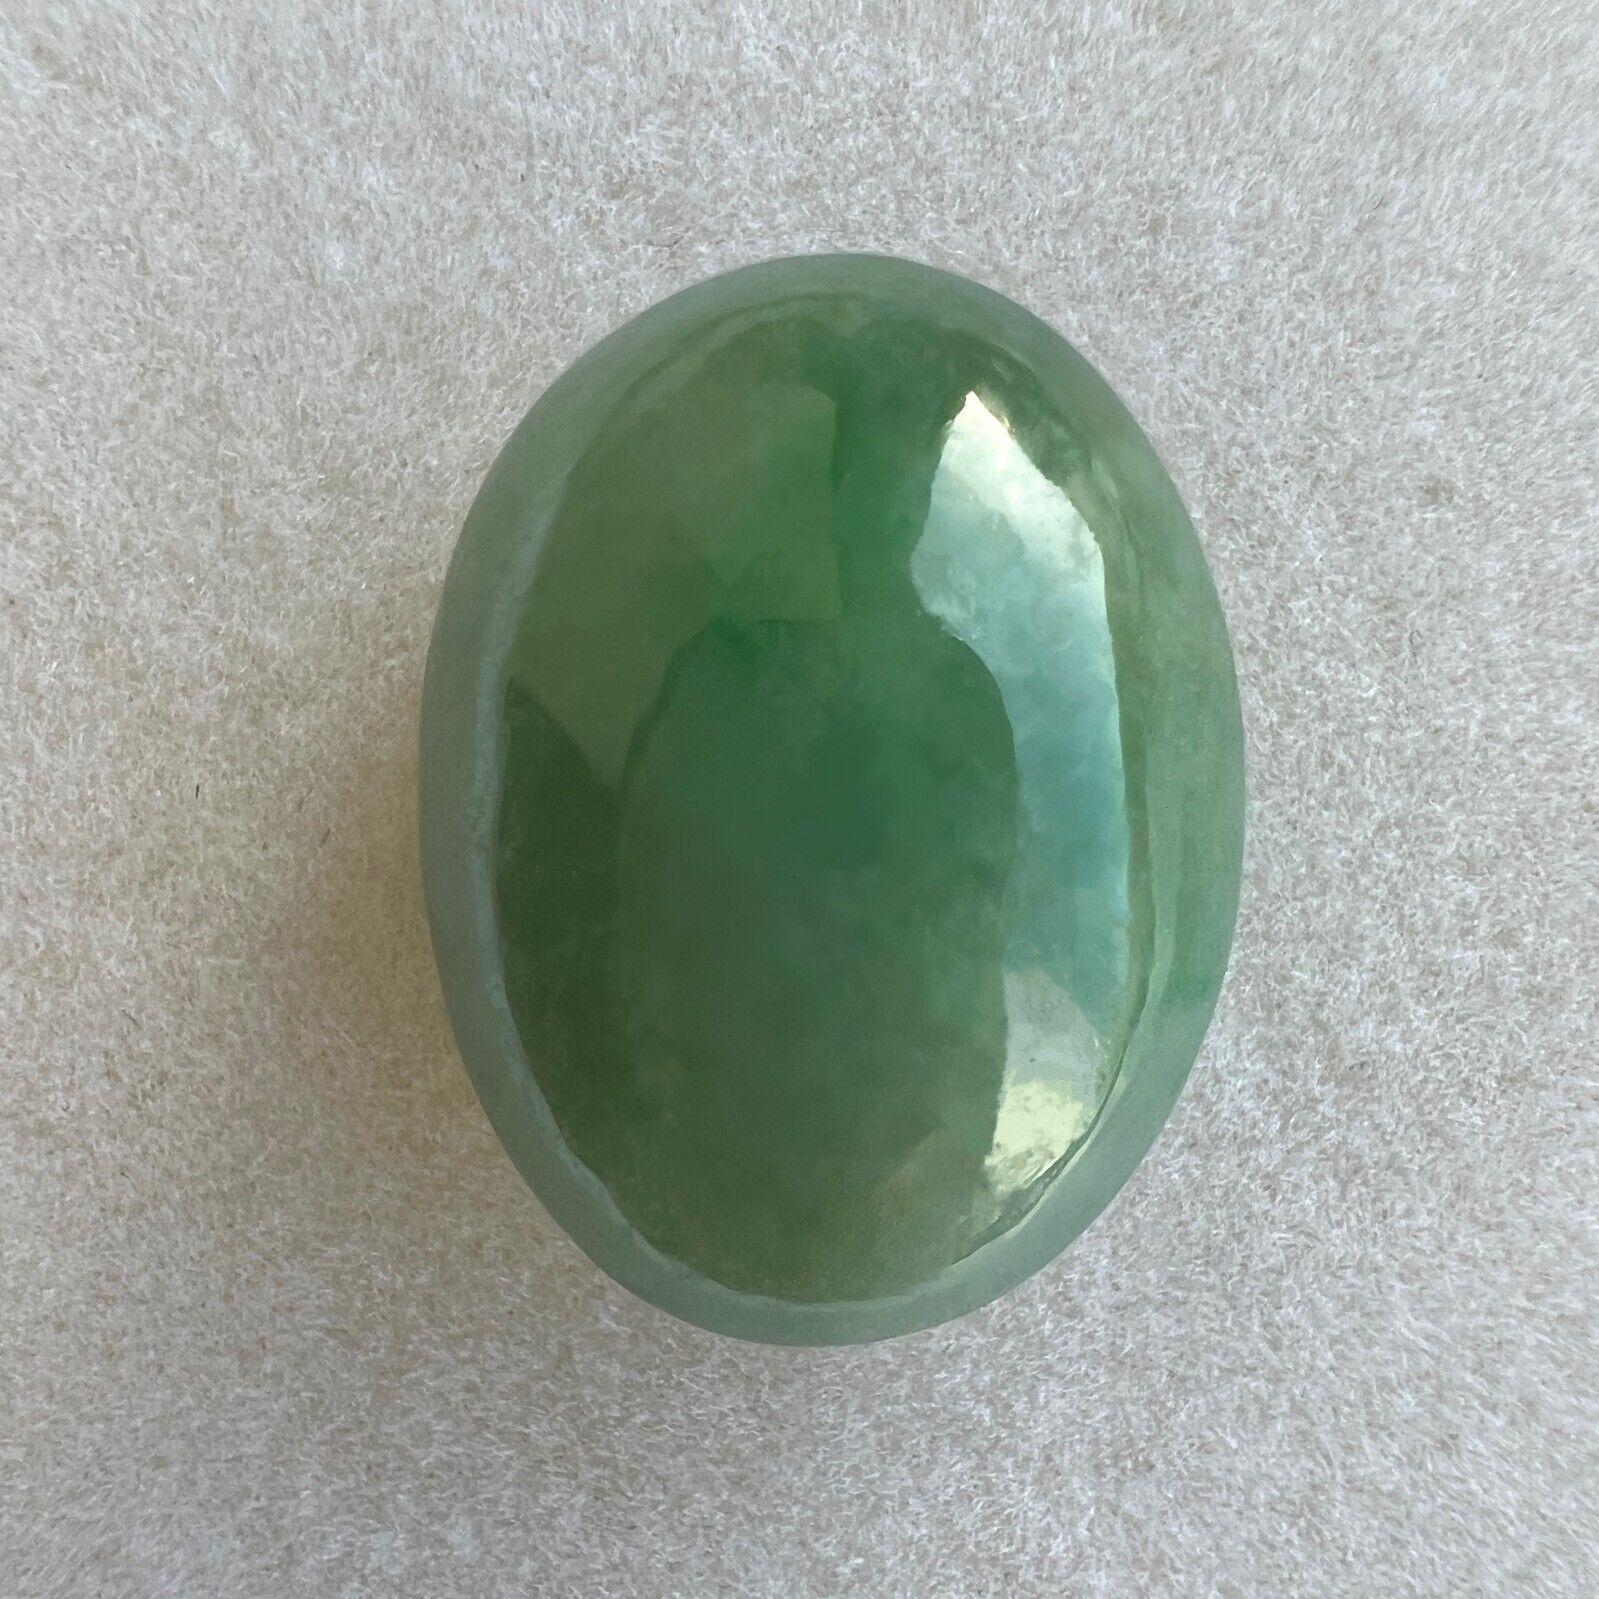 Huge 17.57Ct GIA Certified Green Jadeite Jade ‘A’ Grade Oval Cabochon Rare Gem

Huge GIA Certified Untreated Green Jadeite Gemstone.
17.57 Carat beautiful untreated jadeite stone with a mottled green colour and an excellent oval cabochon cut. Fully